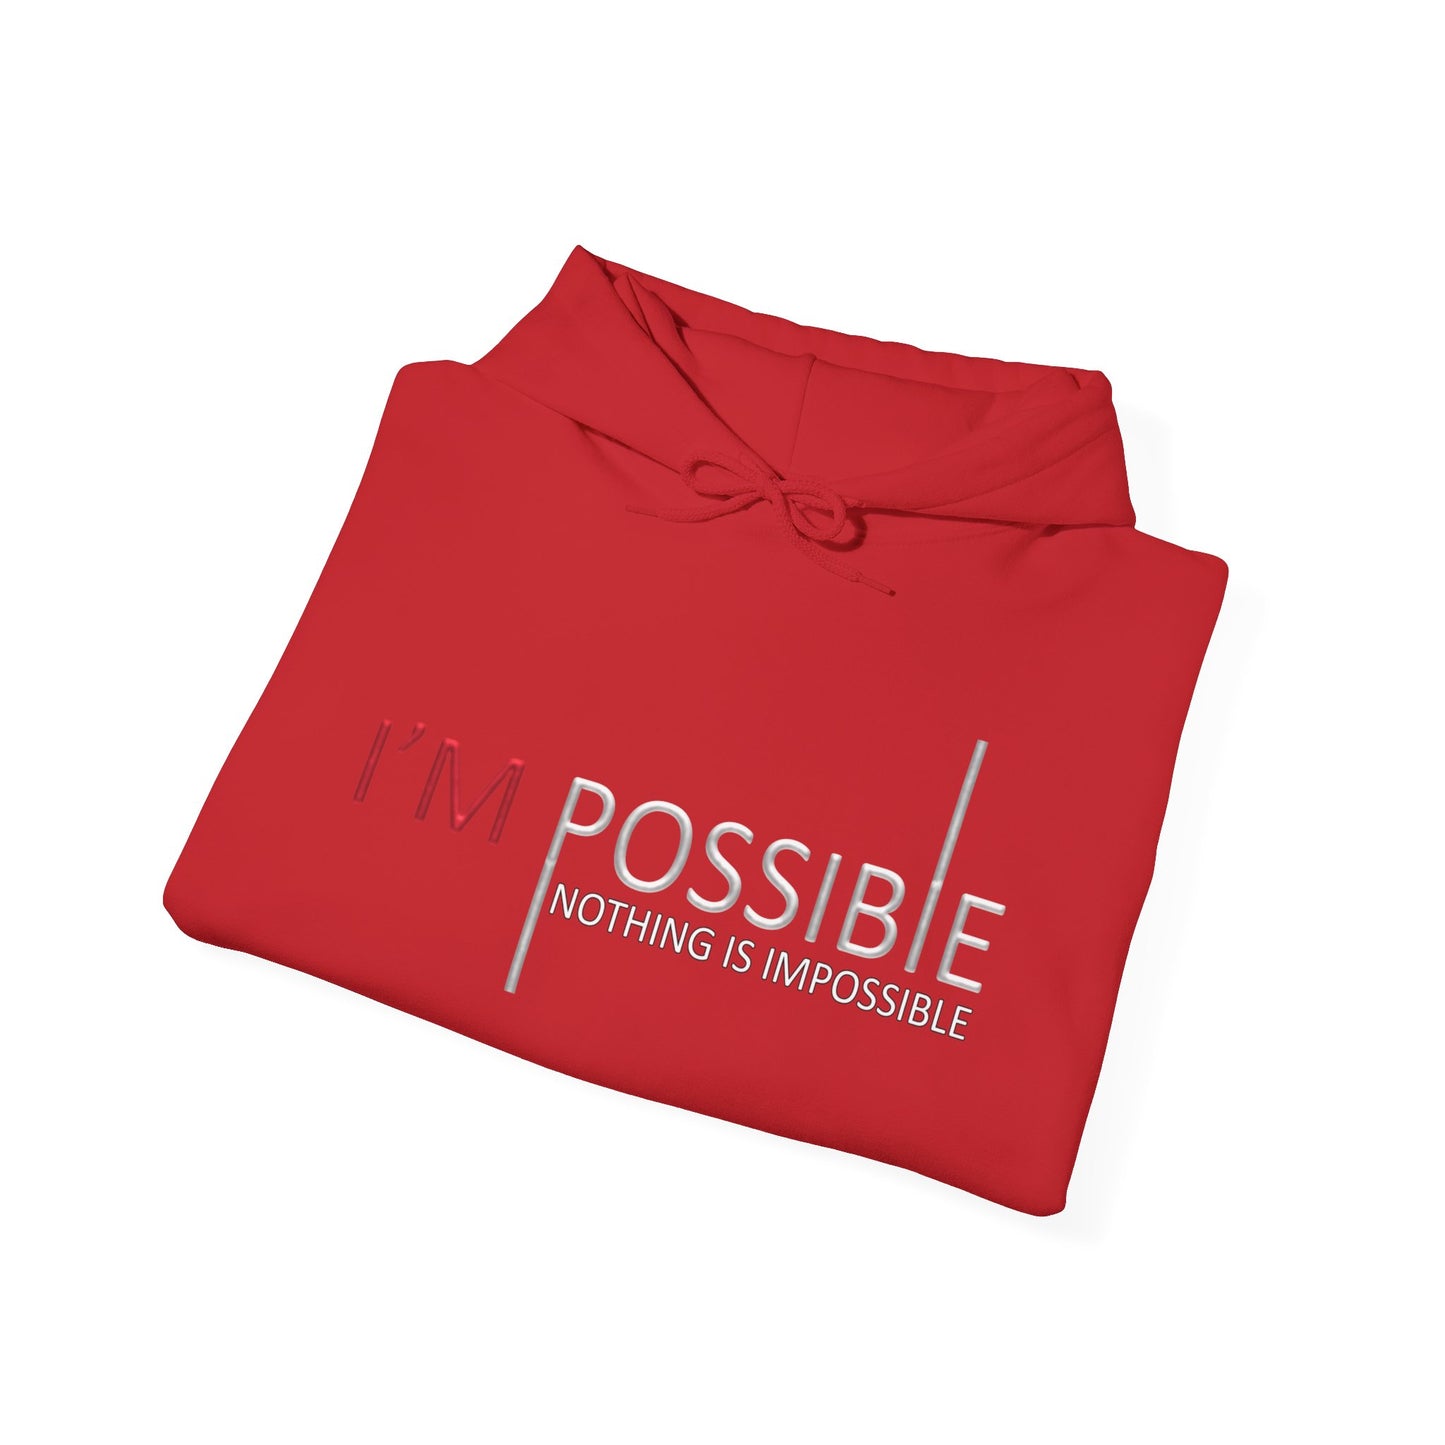 I'm Possible Nothing Is Impossible High Quality Unisex Heavy Blend™ Hoodie